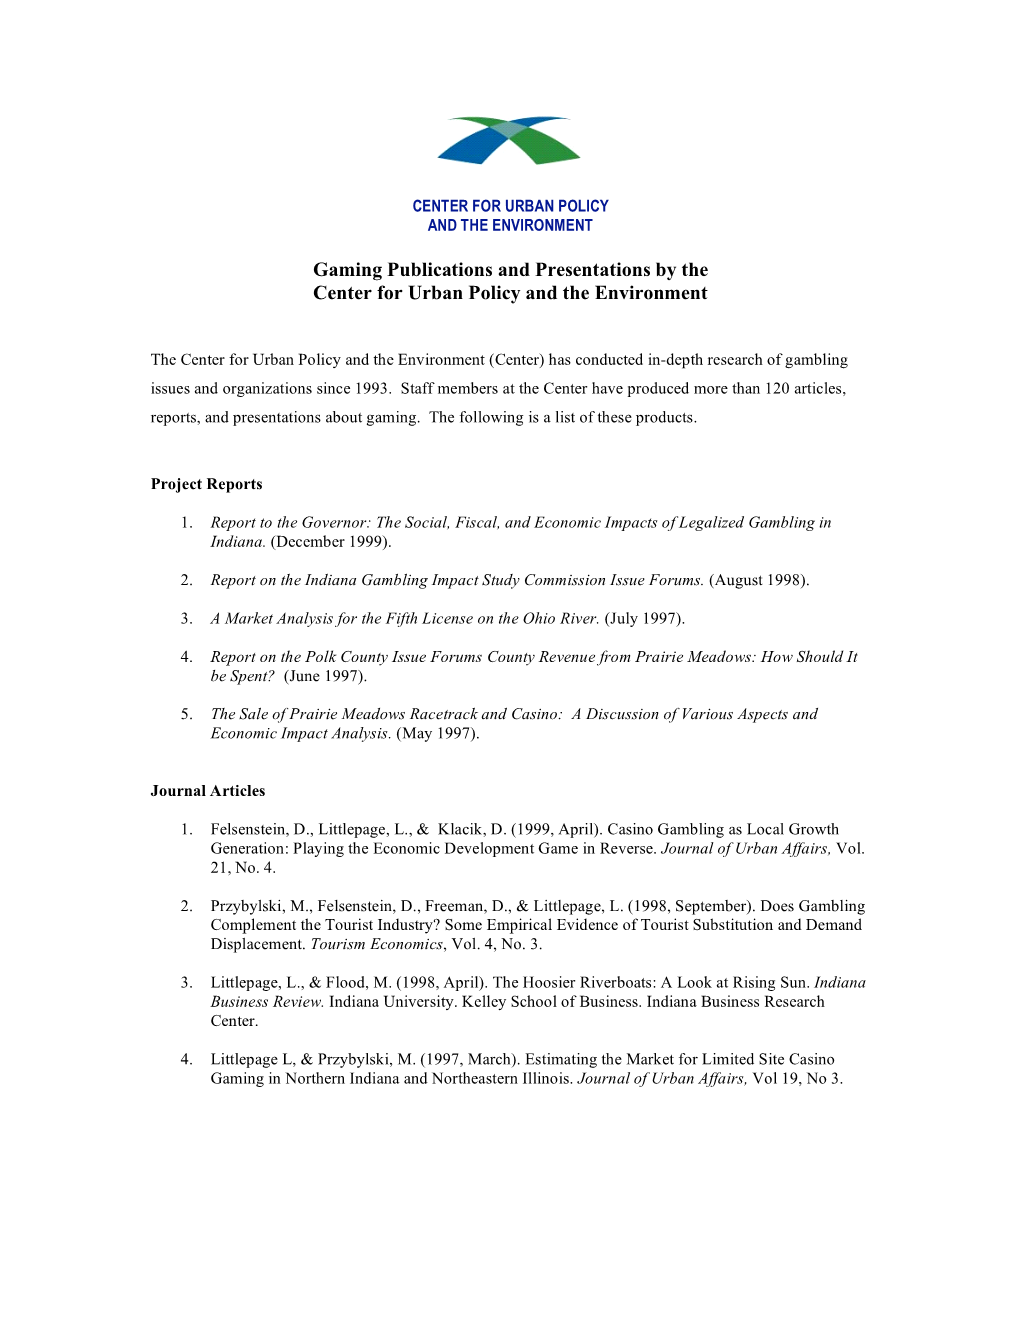 Gaming Publications and Presentations by the Center for Urban Policy and the Environment